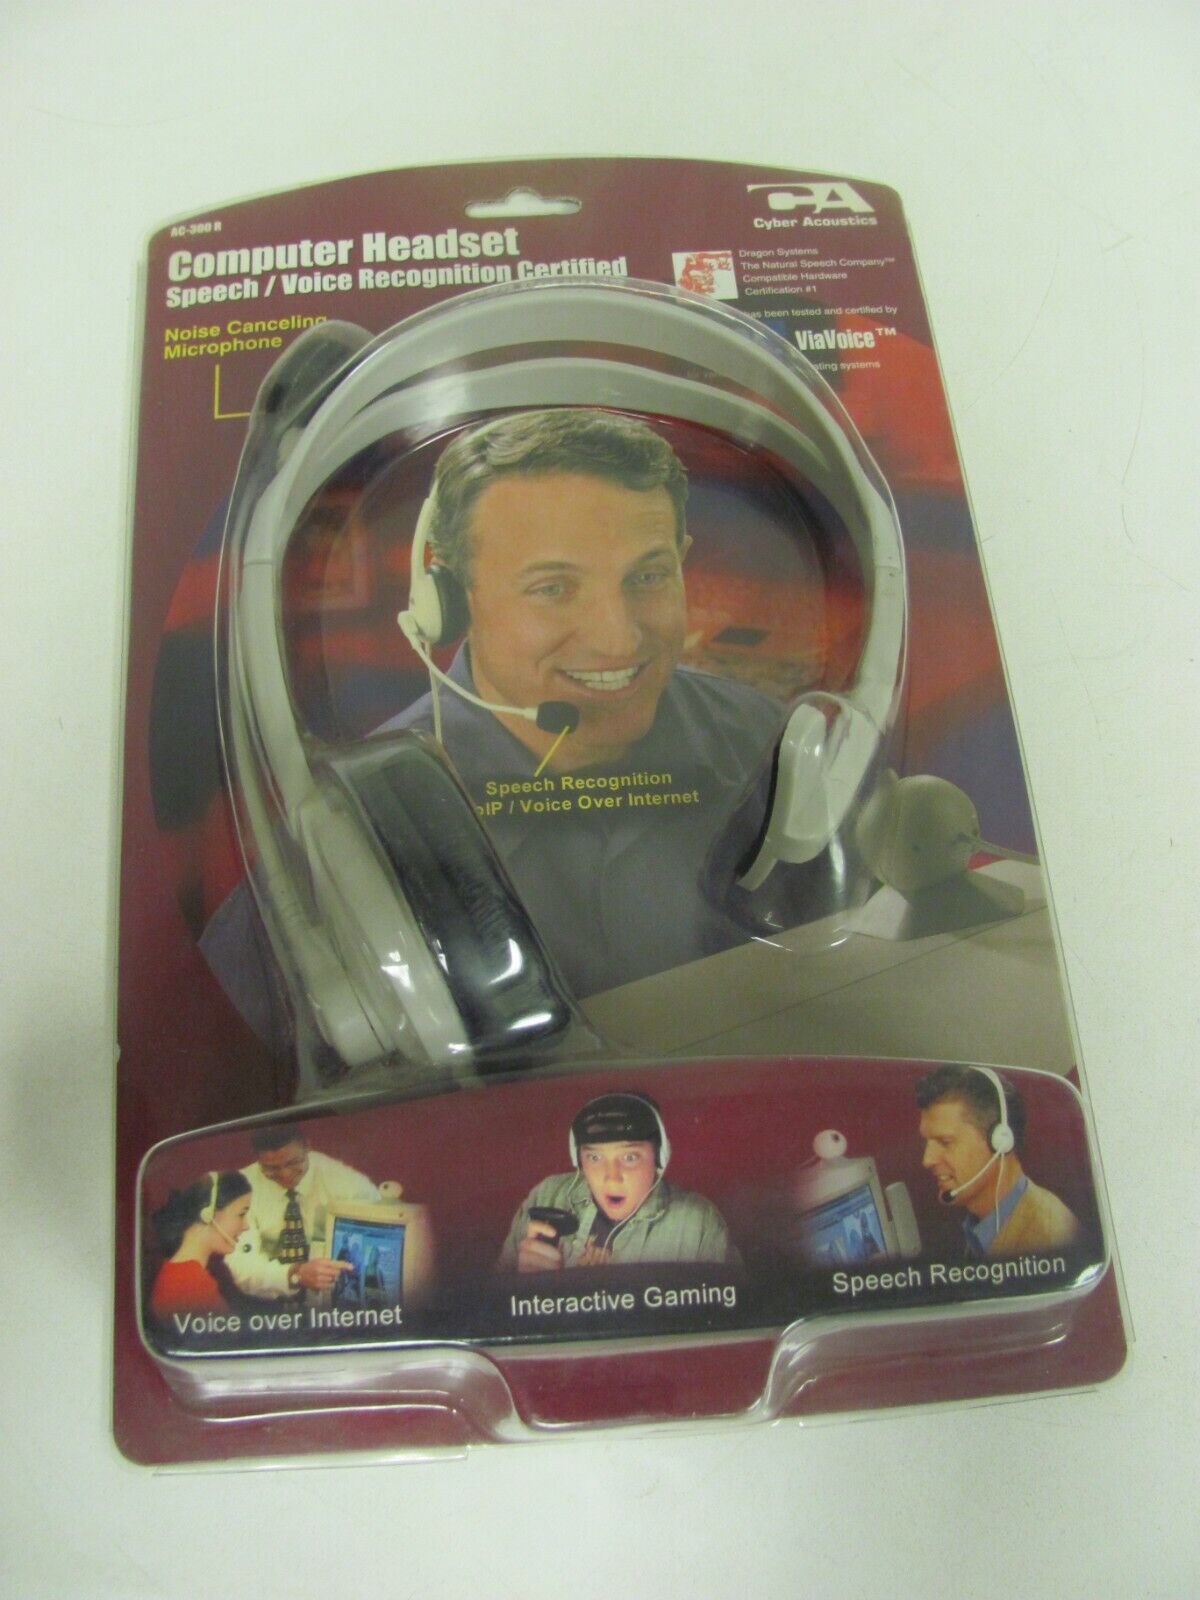 Vintage Cyber Acoustic Computer Headset Noise Canceling Microphone AC-300R